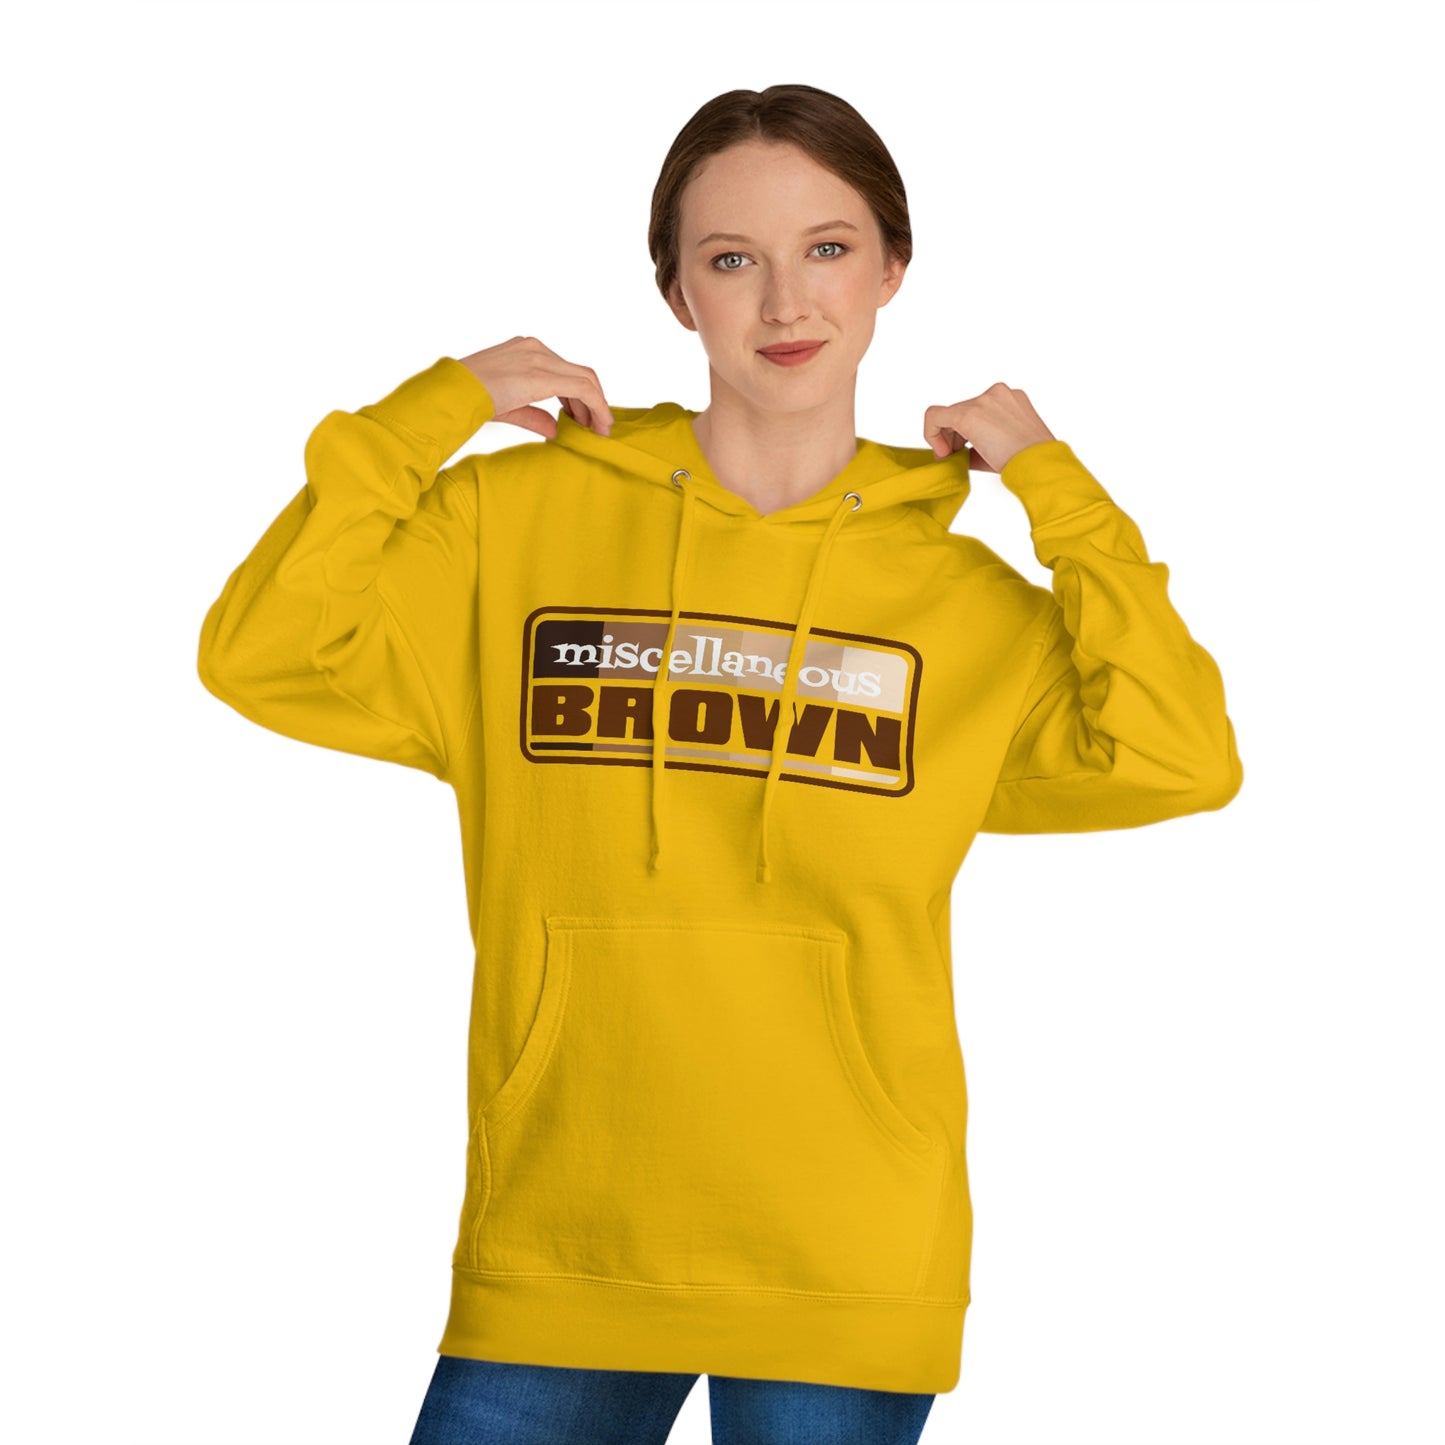 Official Miscellaneous Brown Comedy Special Unisex Hooded Sweatshirt